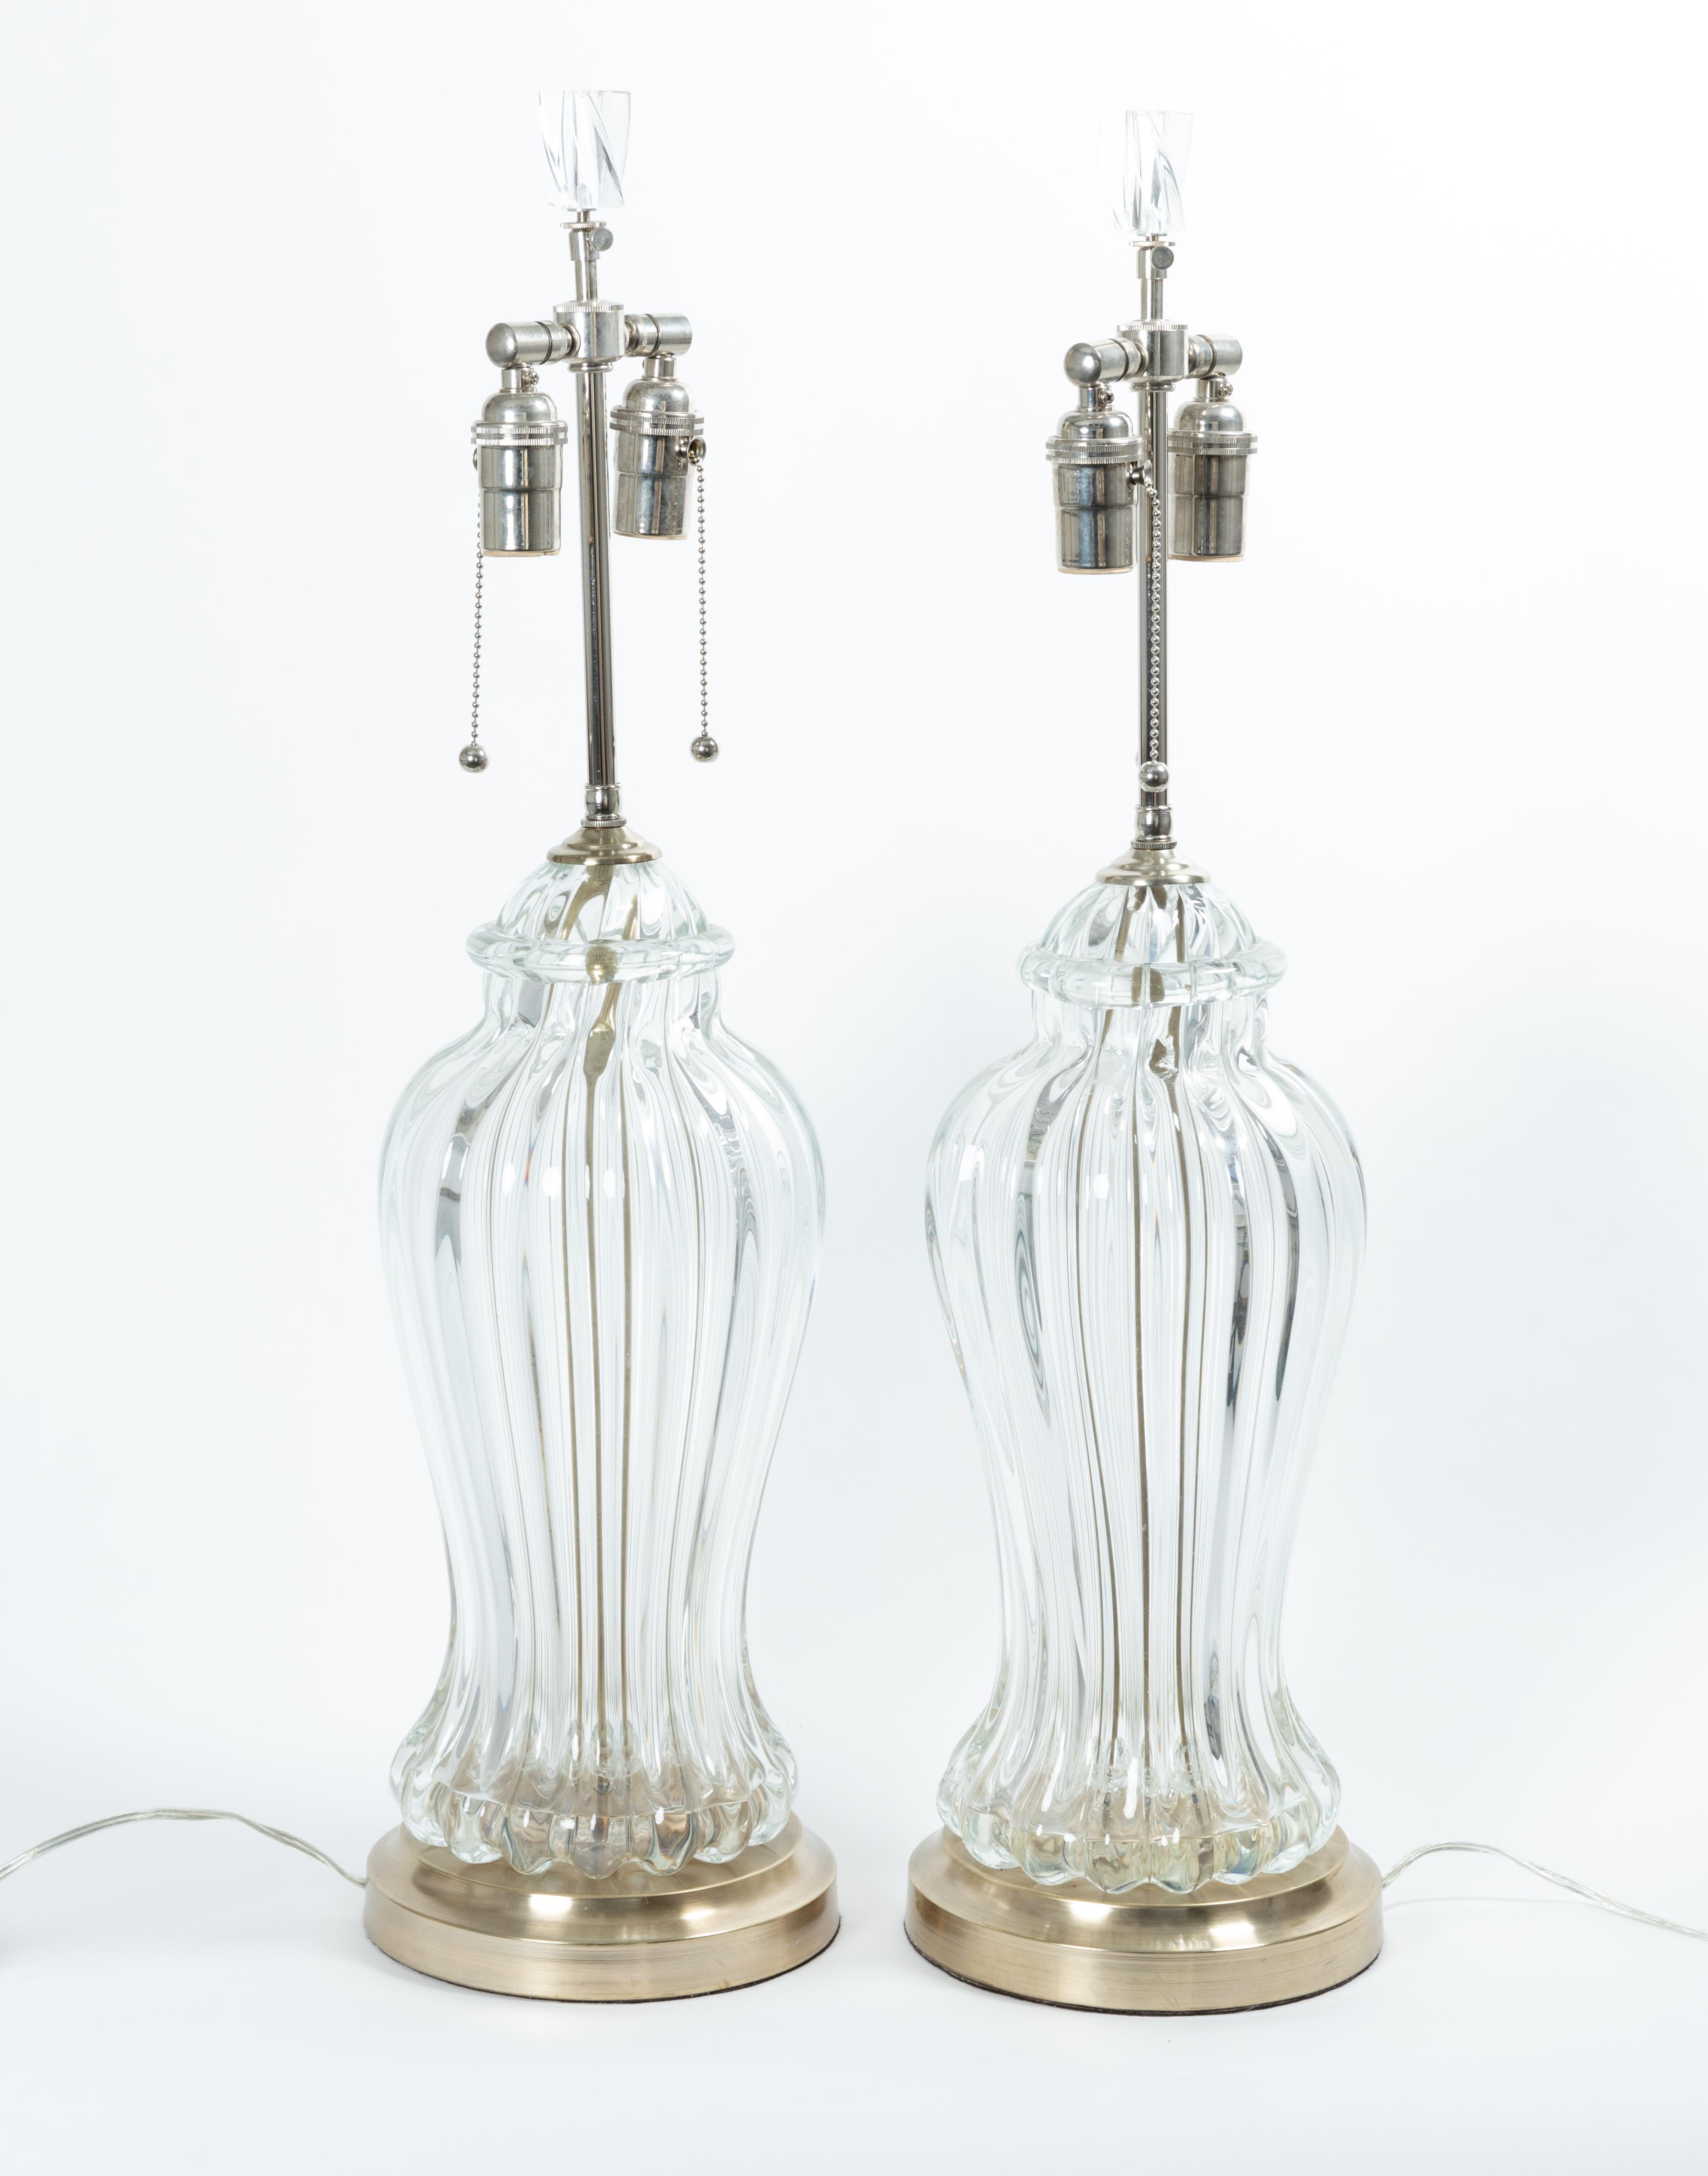 Pair of fluted clear Murano glass table lamps with nickel detail.